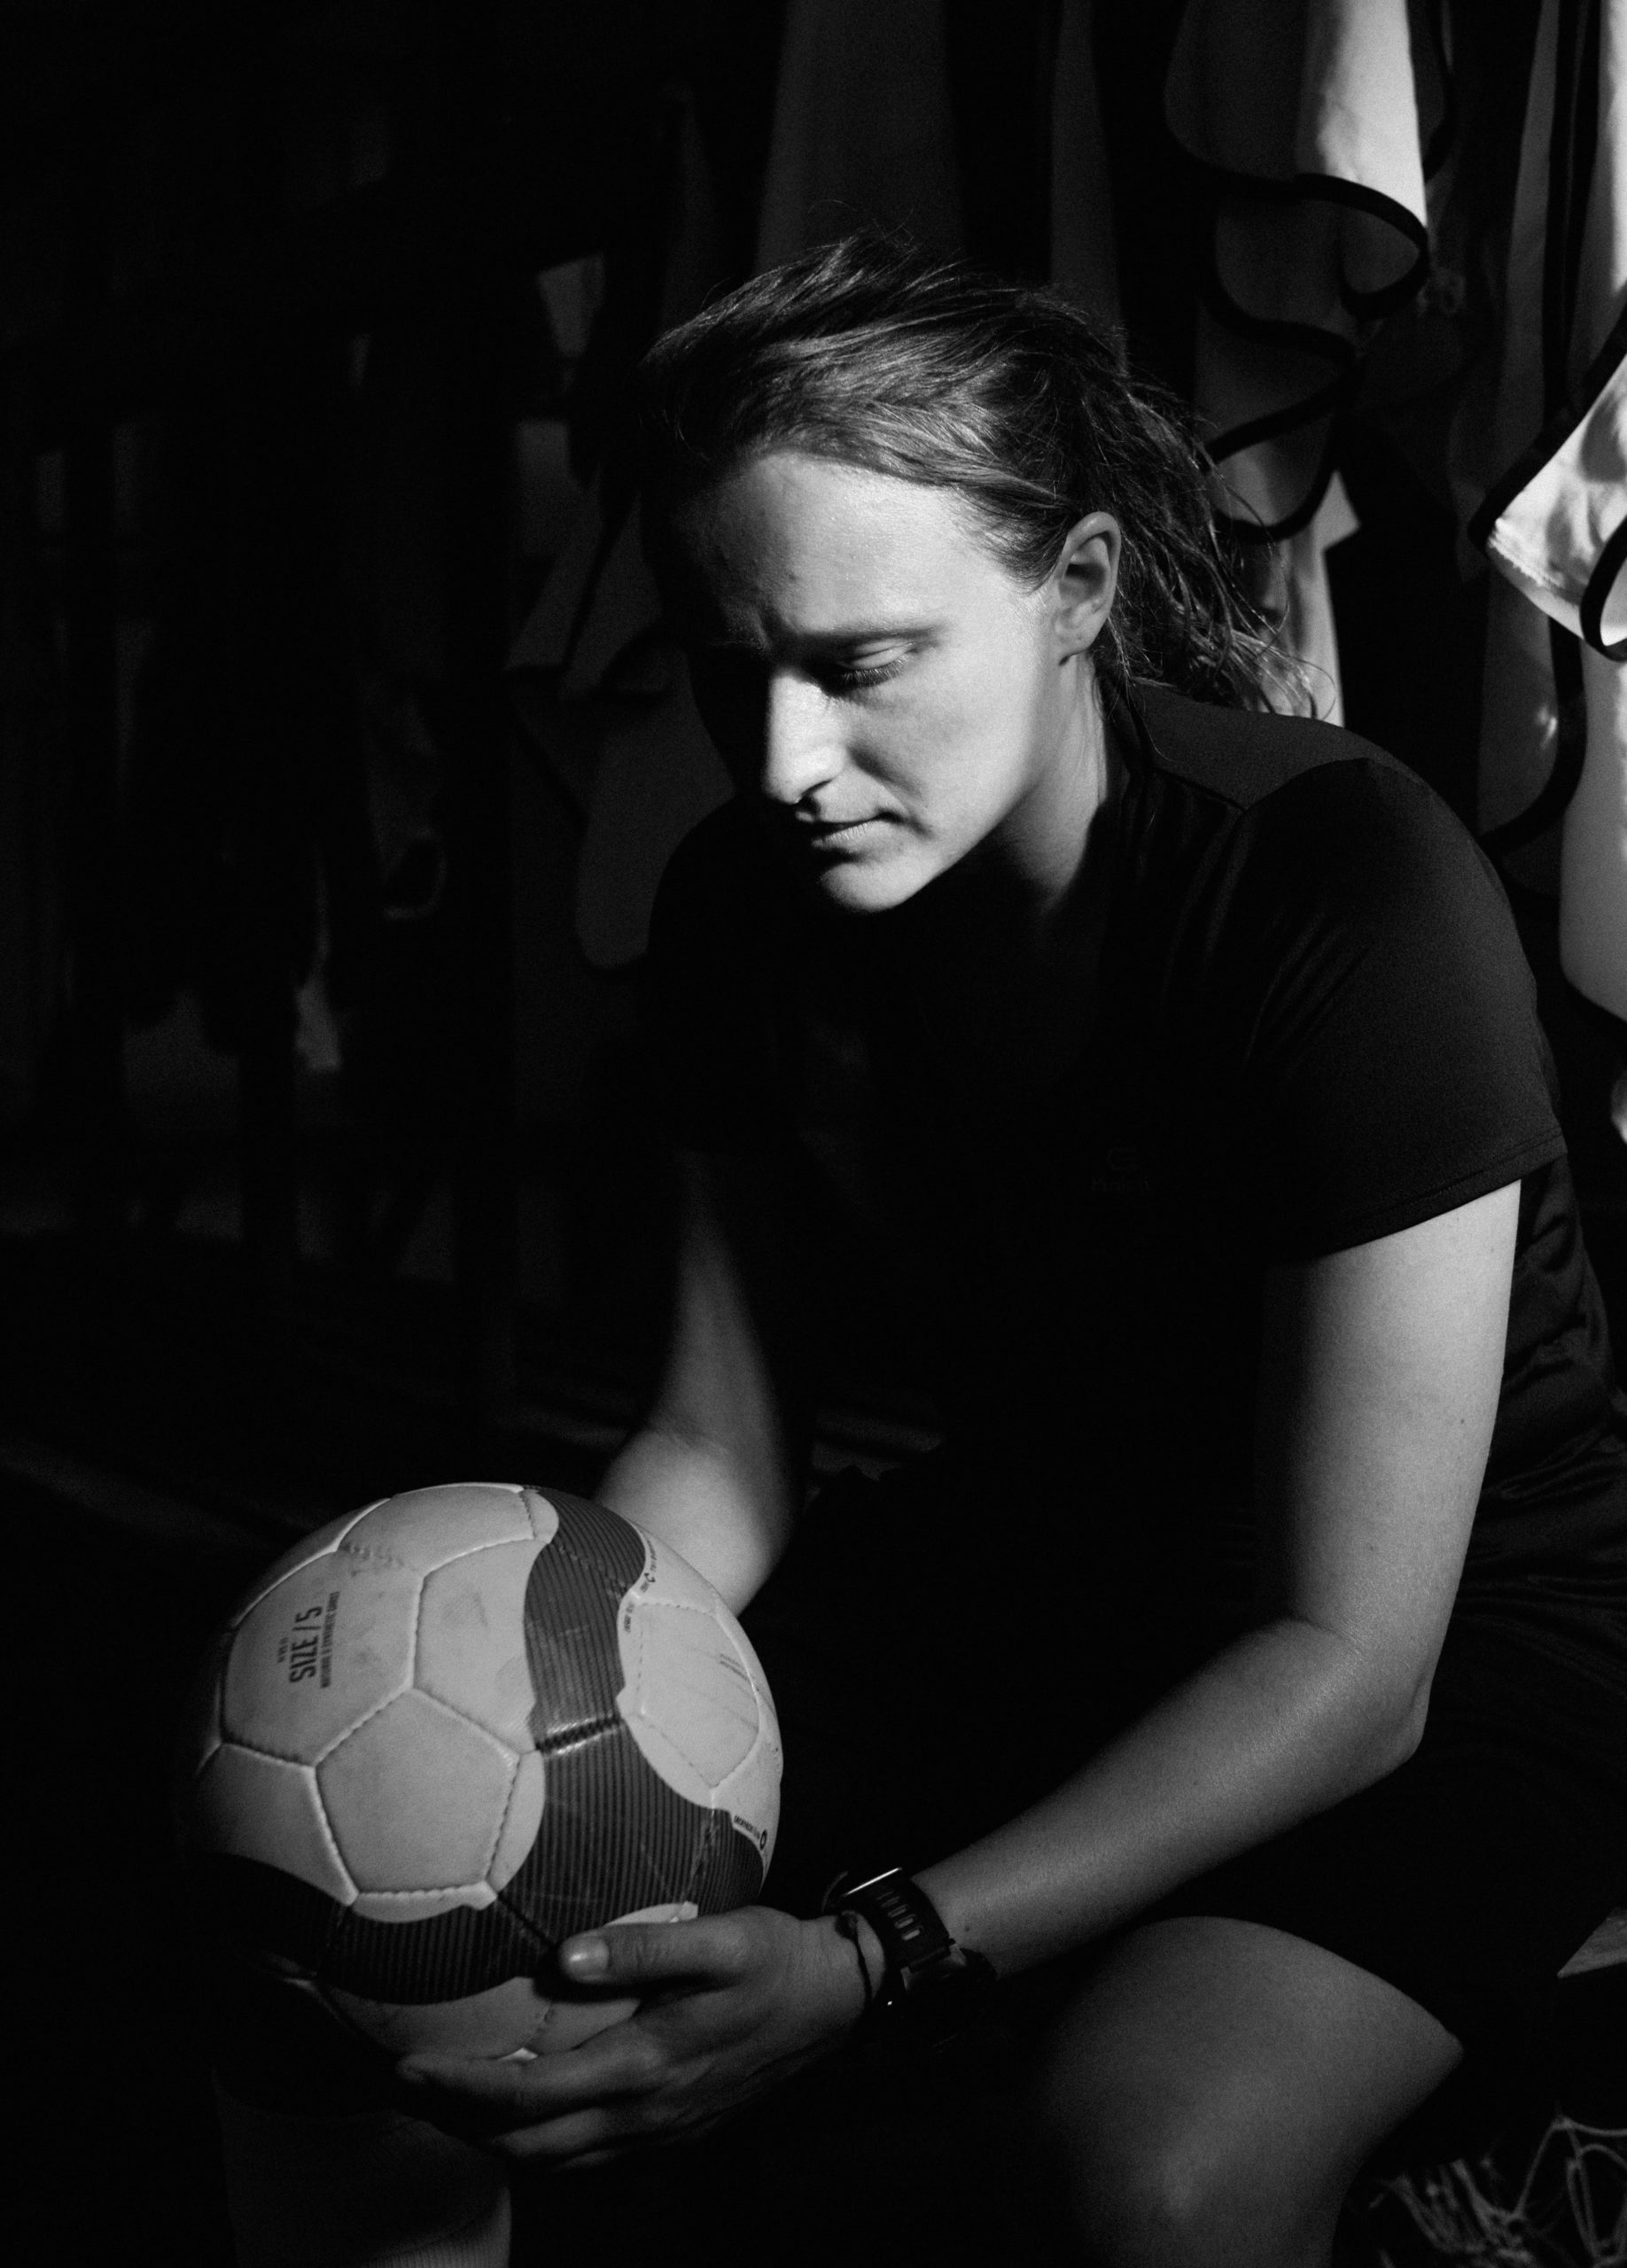 woman with hair in ponytail overcoming feelings of failure sitting in dark room holding soccer ball looking stressed